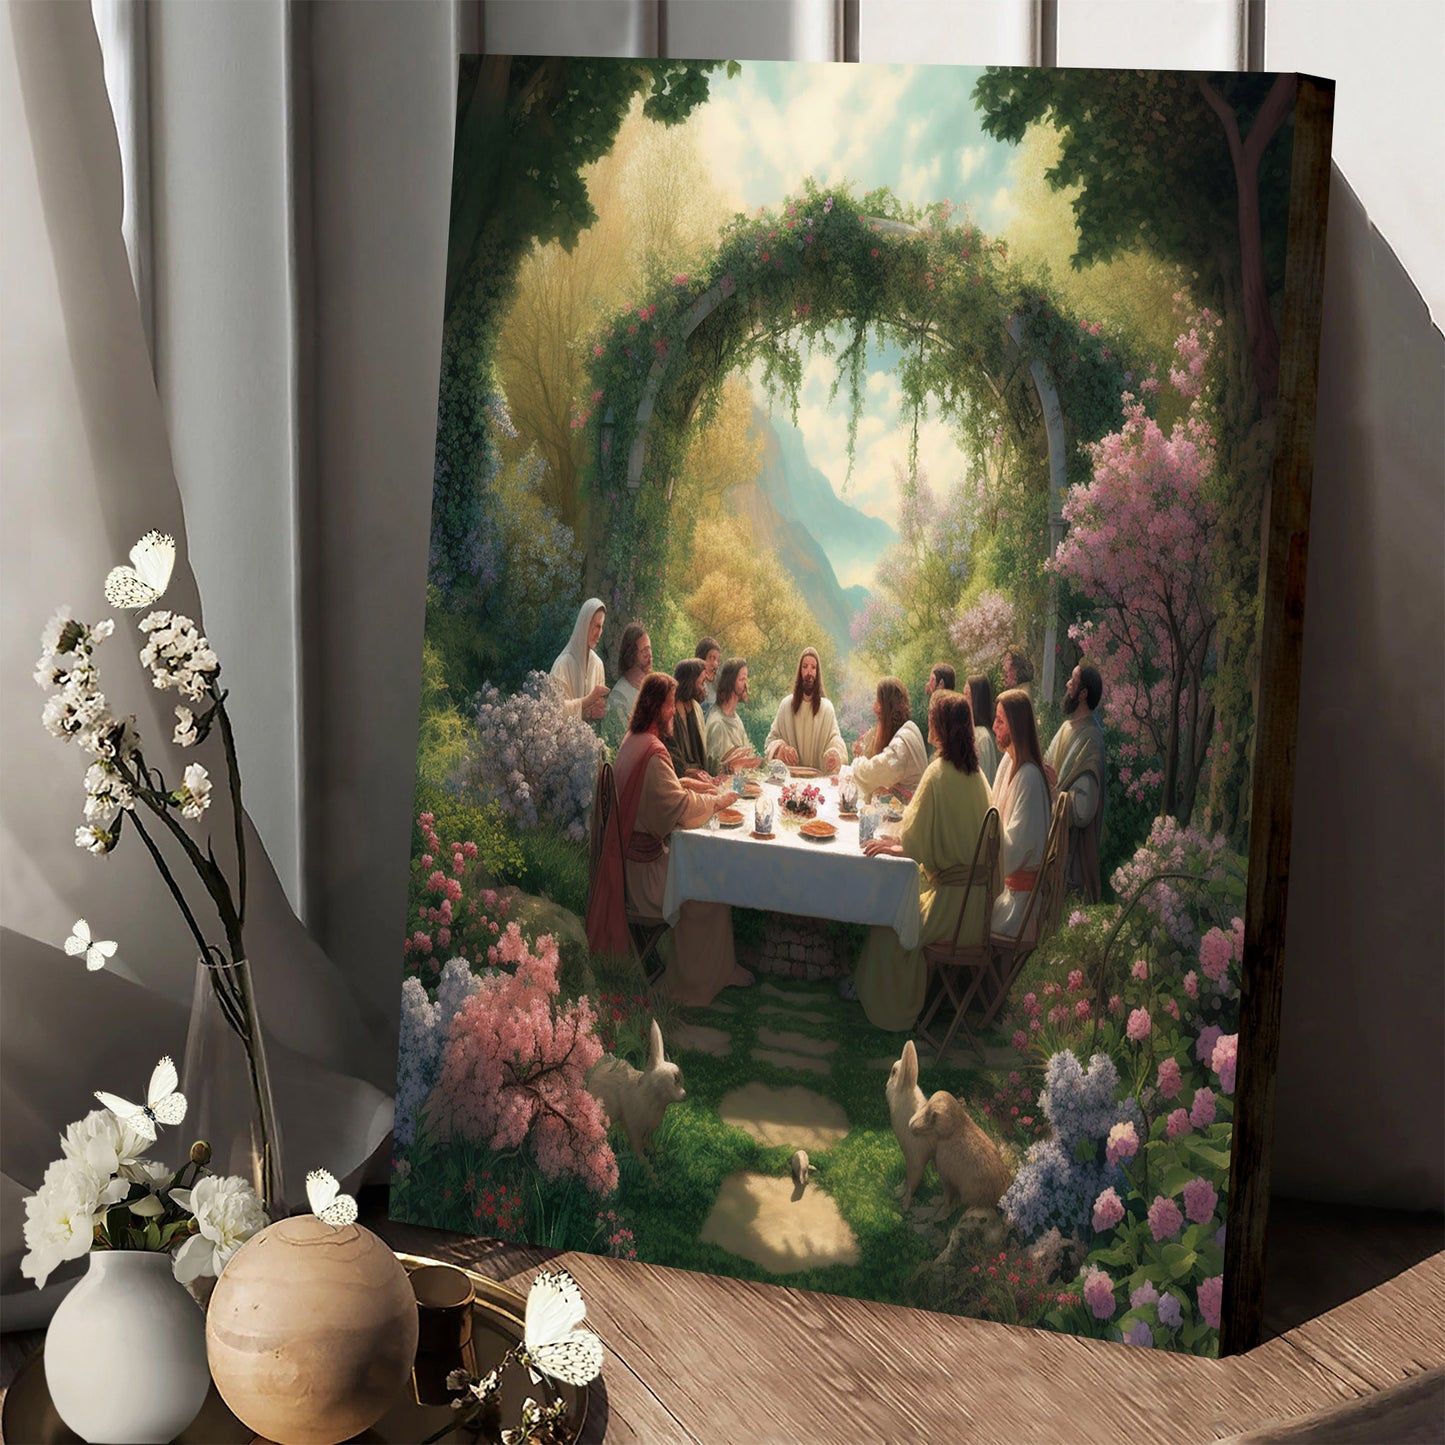 The Final Meal Of Jesus Christ - Jesus Canvas Pictures - Christian Wall Art